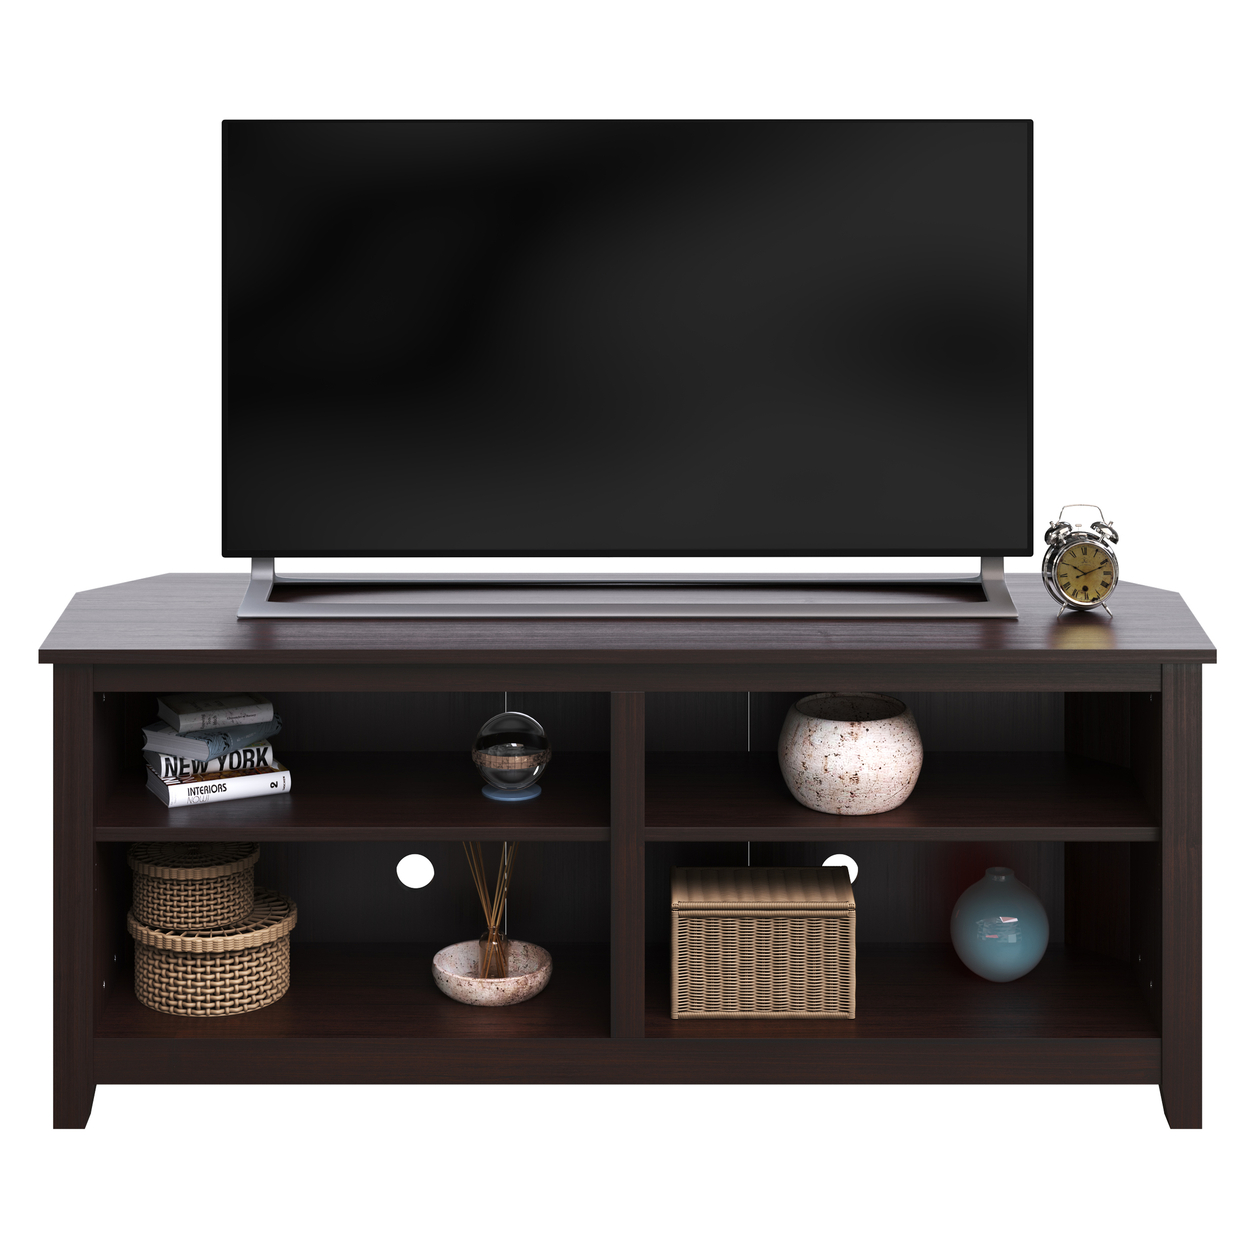 Entertainment Center TV Stand Supports Up To 65-inch TVs, Espresso